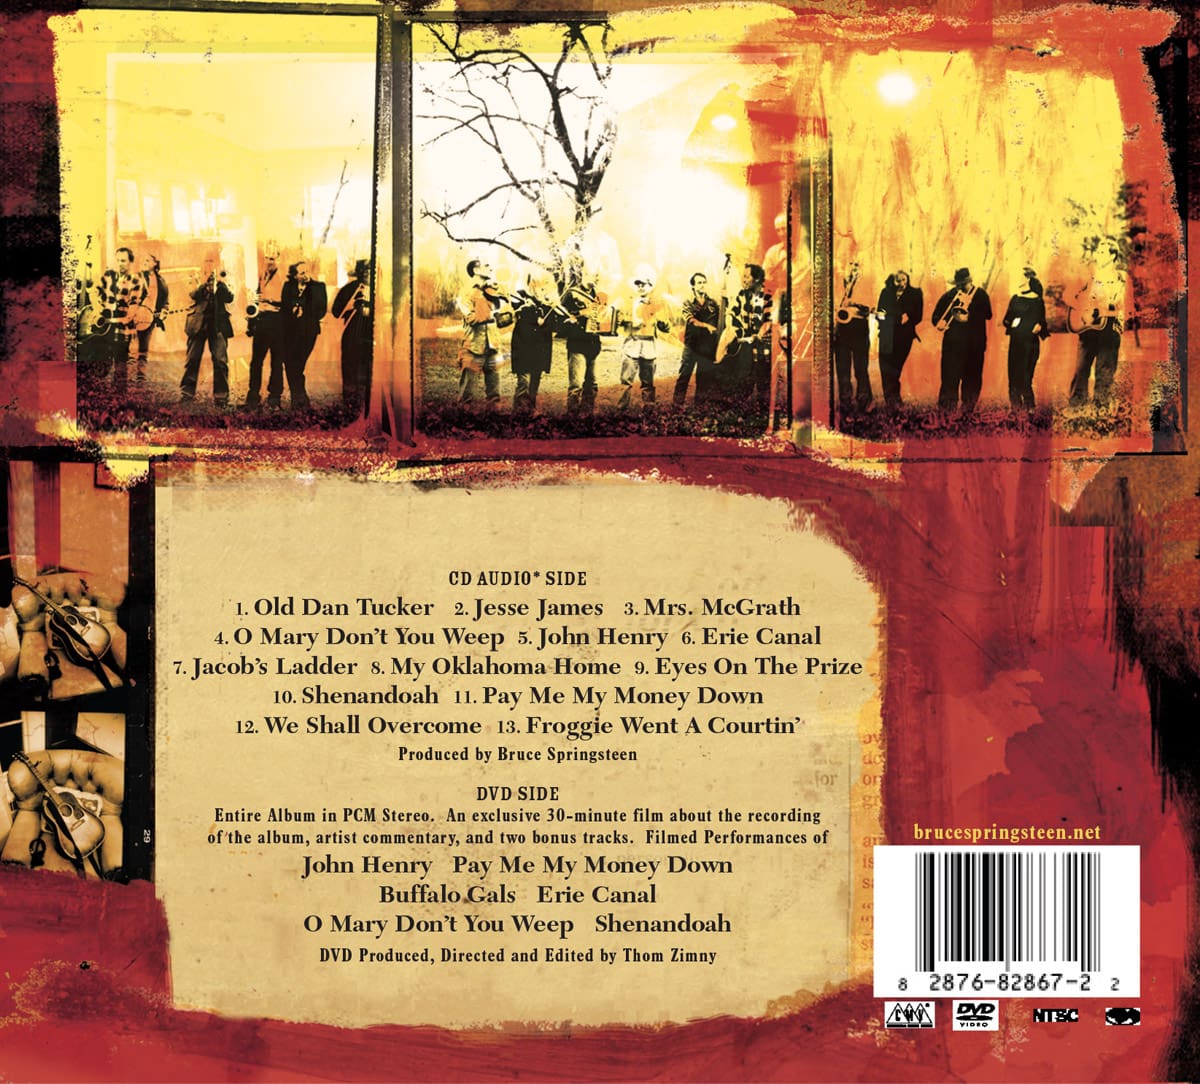 Bruce Springsteen We Shall Overcome: The Seeger Sessions back cover